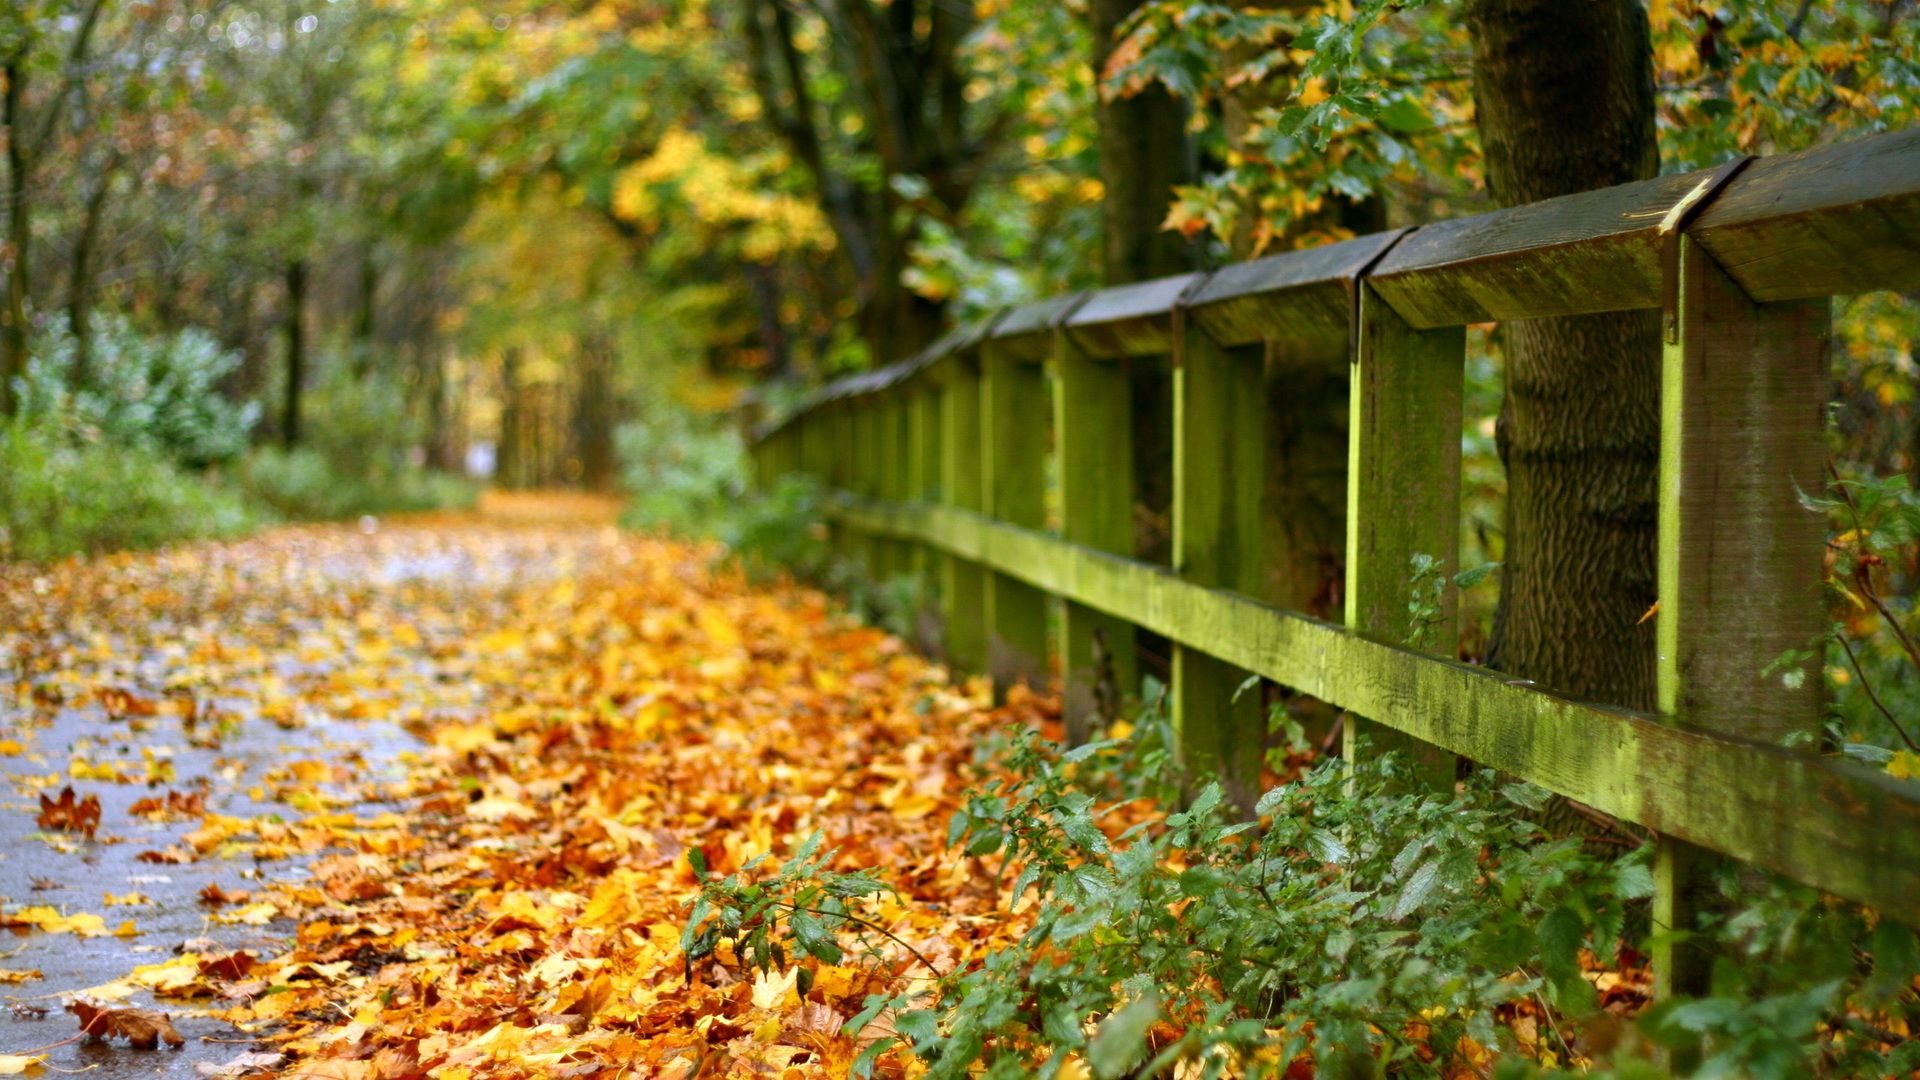 The Wallpapers Hd Autumn